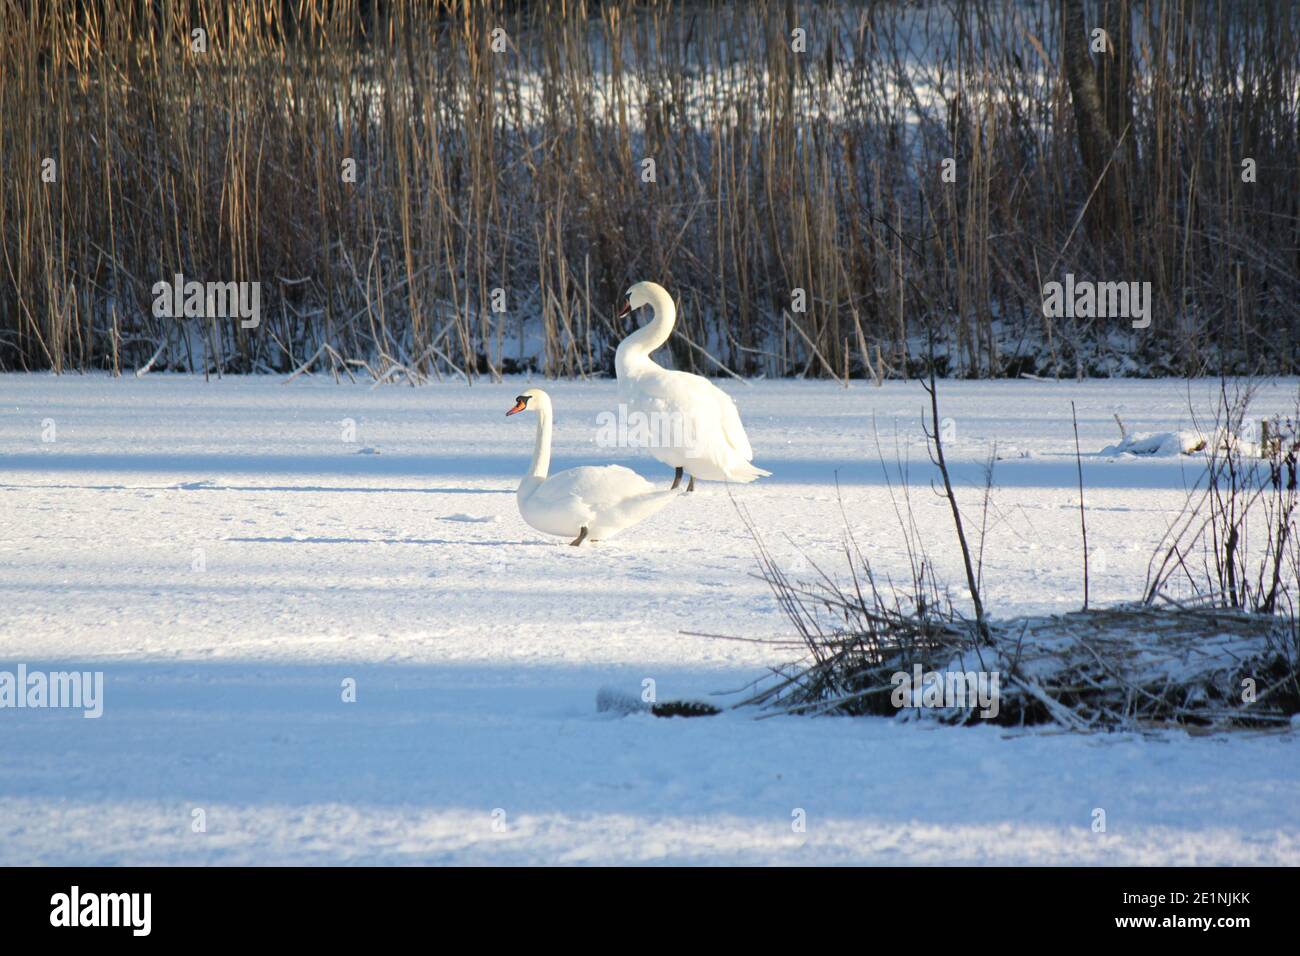 Two white swans sitting on a frozen lake covered with snow. Winter landscapes and wild birds in nature. Frozen lakes and landscapes in Scotland. Stock Photo